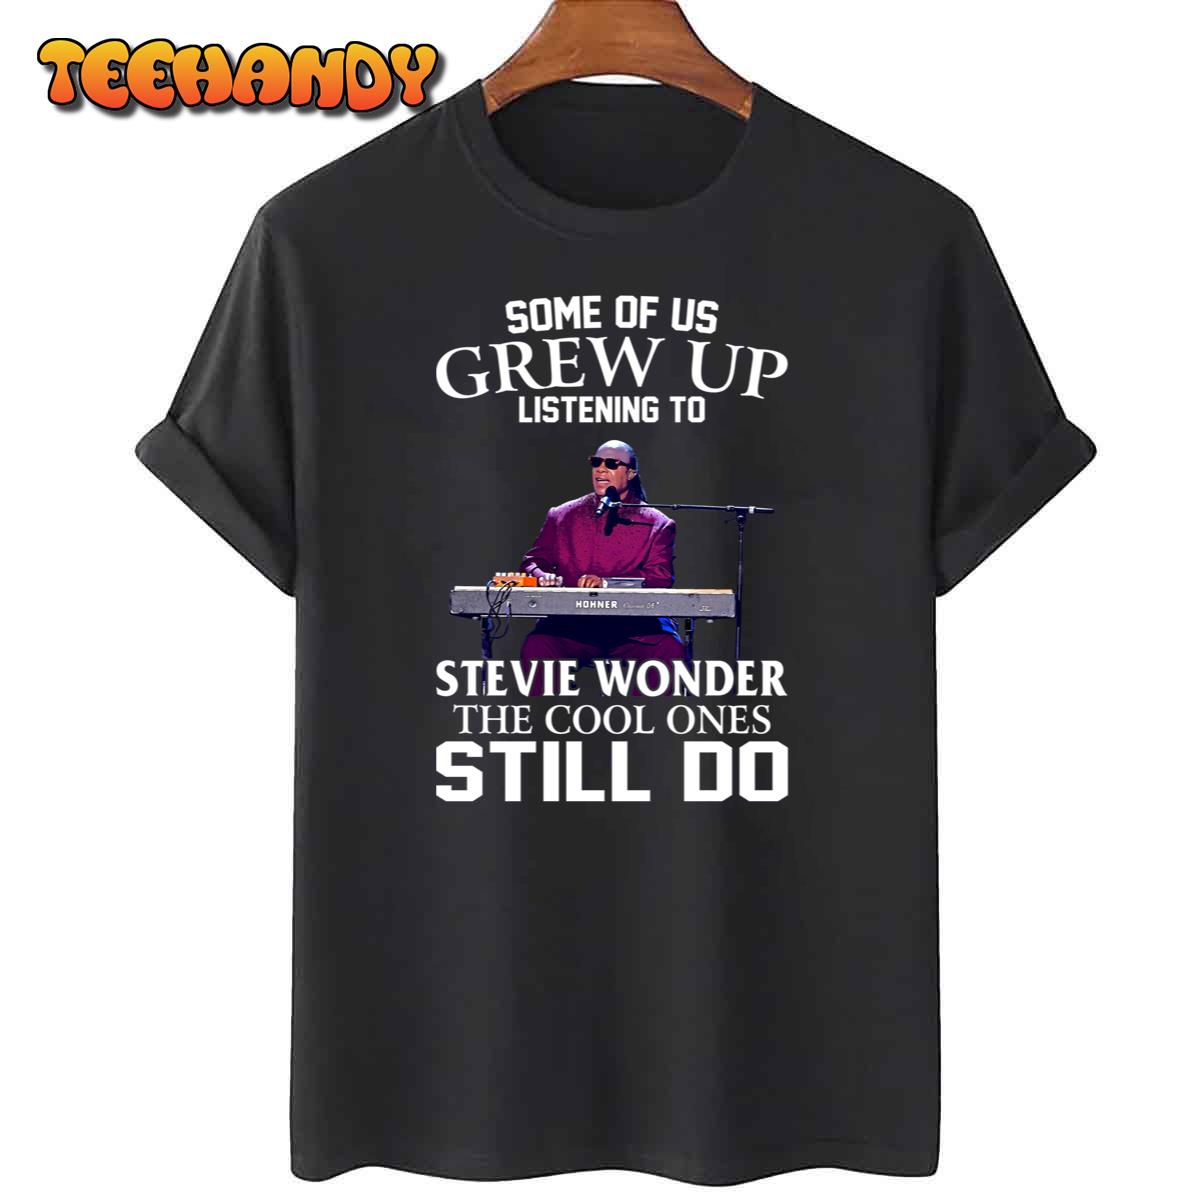 Some Of Us Grew Up Listening To Stevie Wonder The Cool Ones Still Do T-Shirt